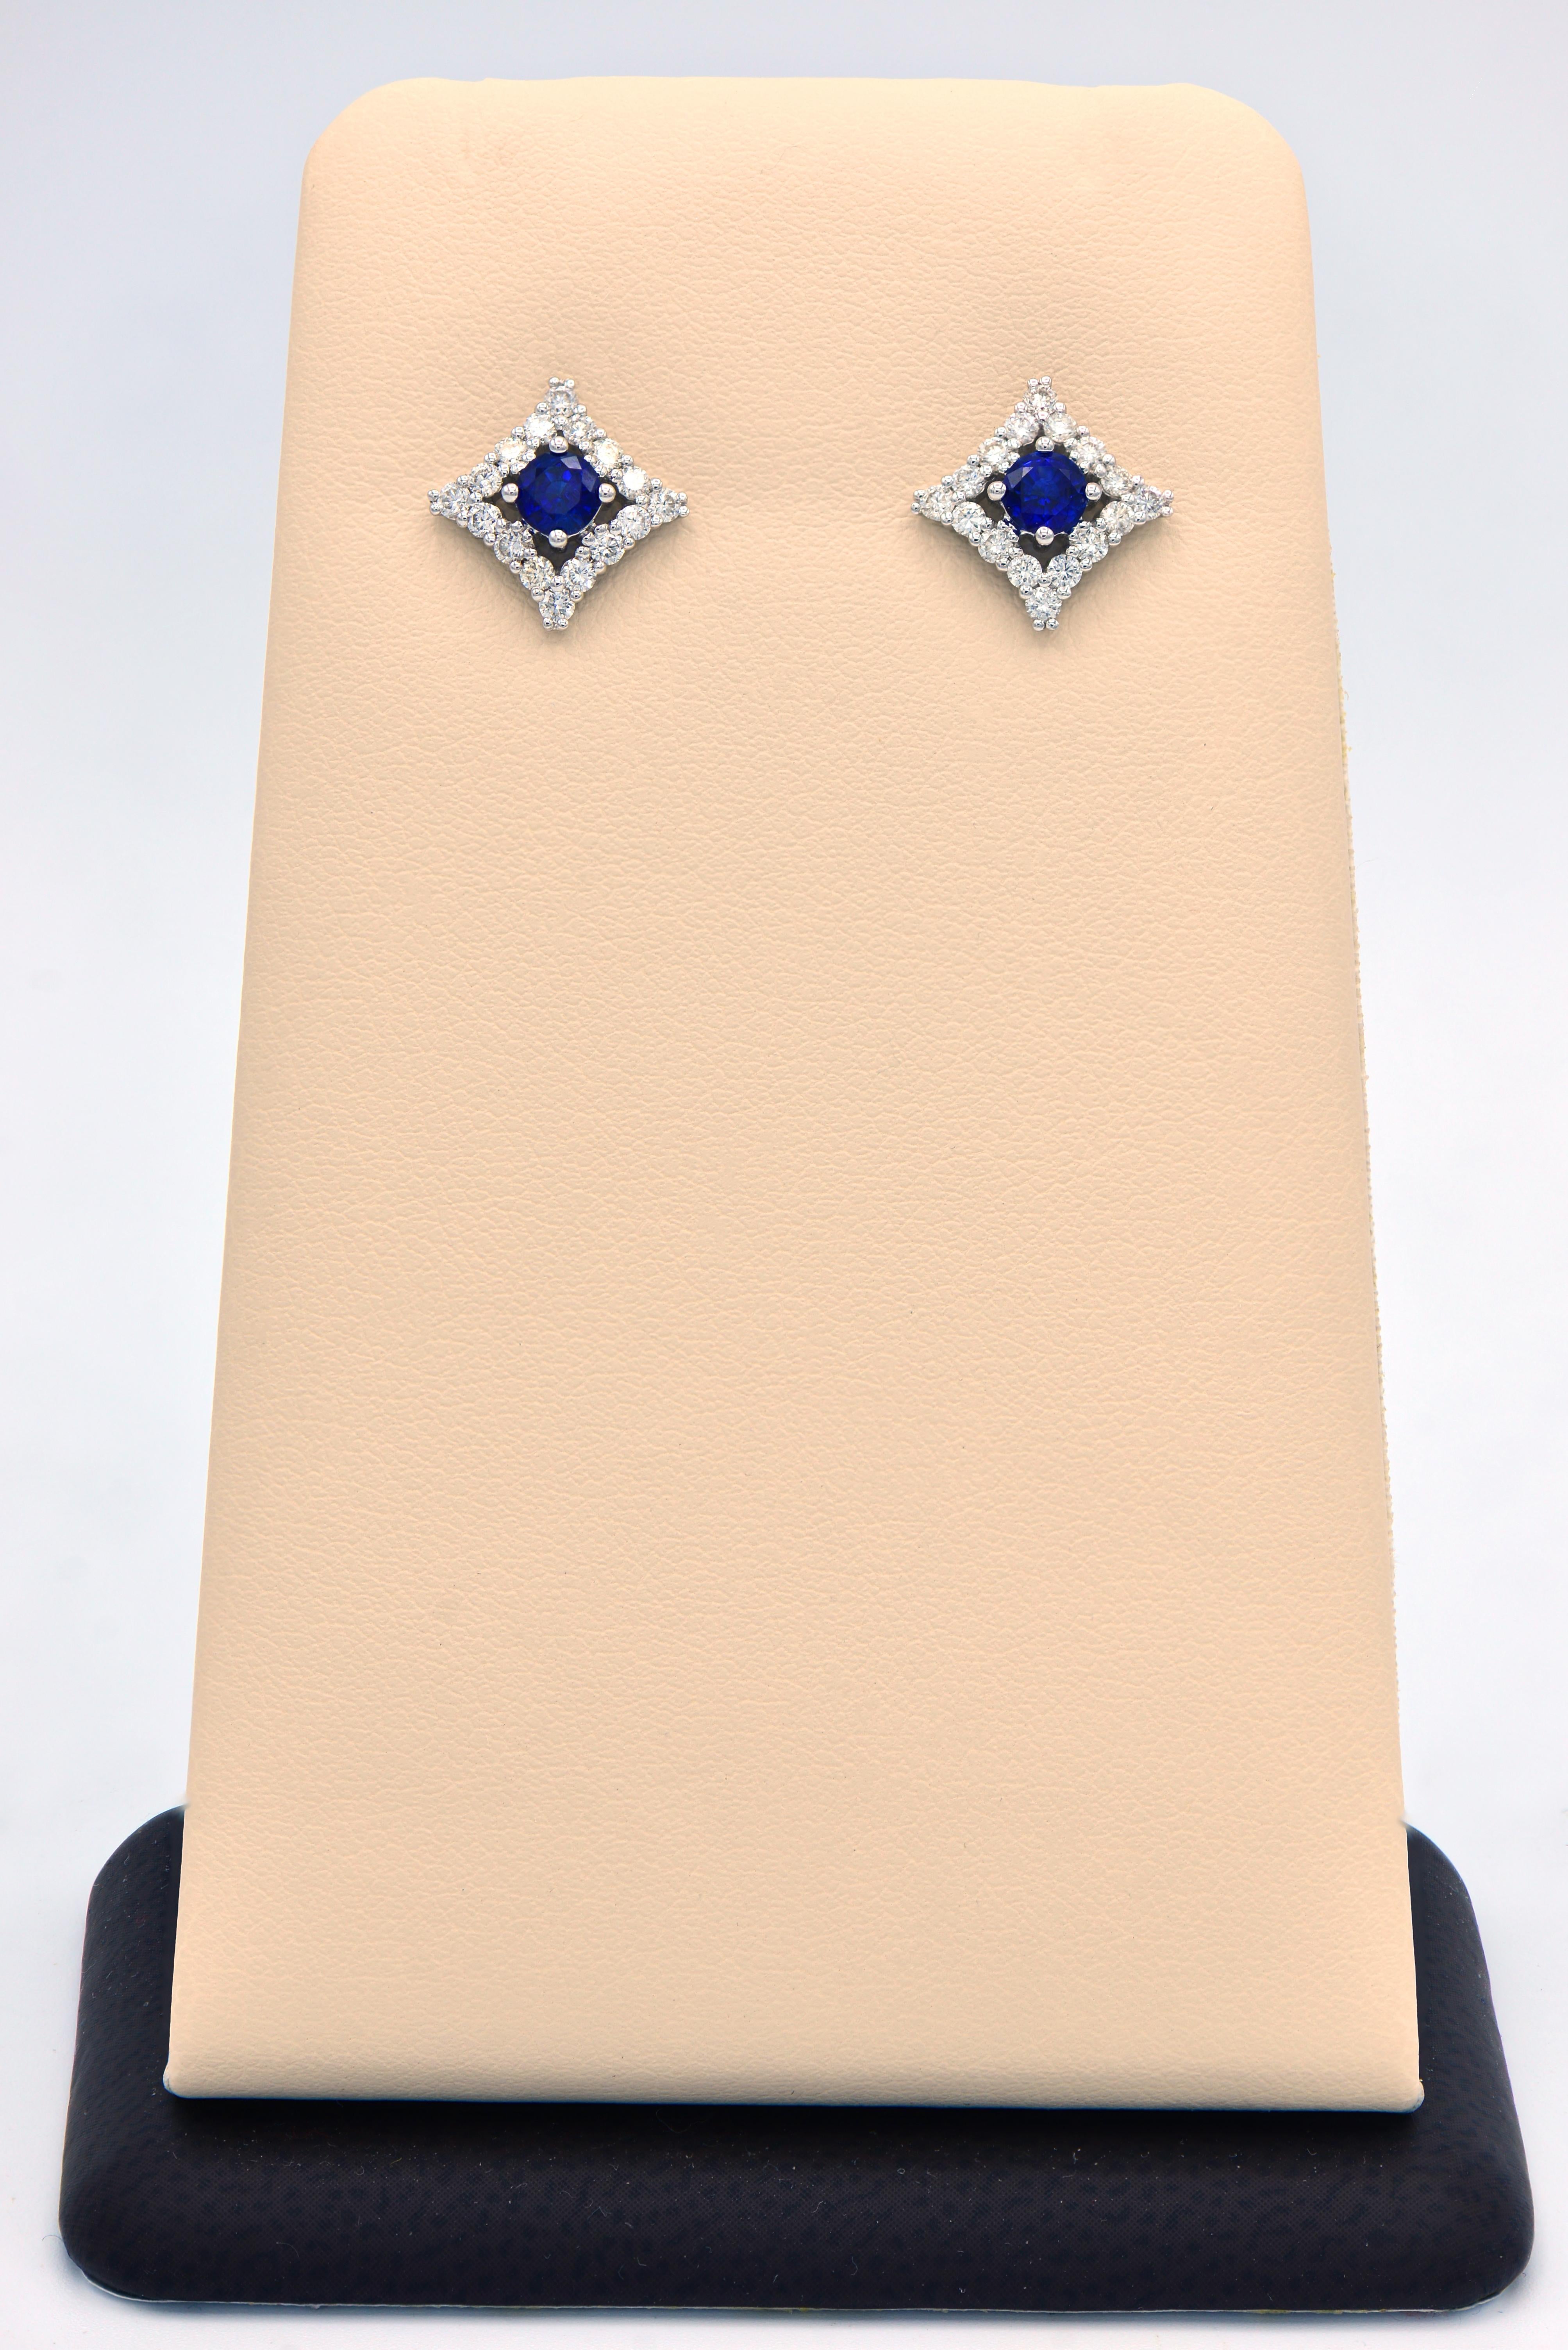 Round Cut Pillow Shaped Sapphire and Diamond Earrings For Sale